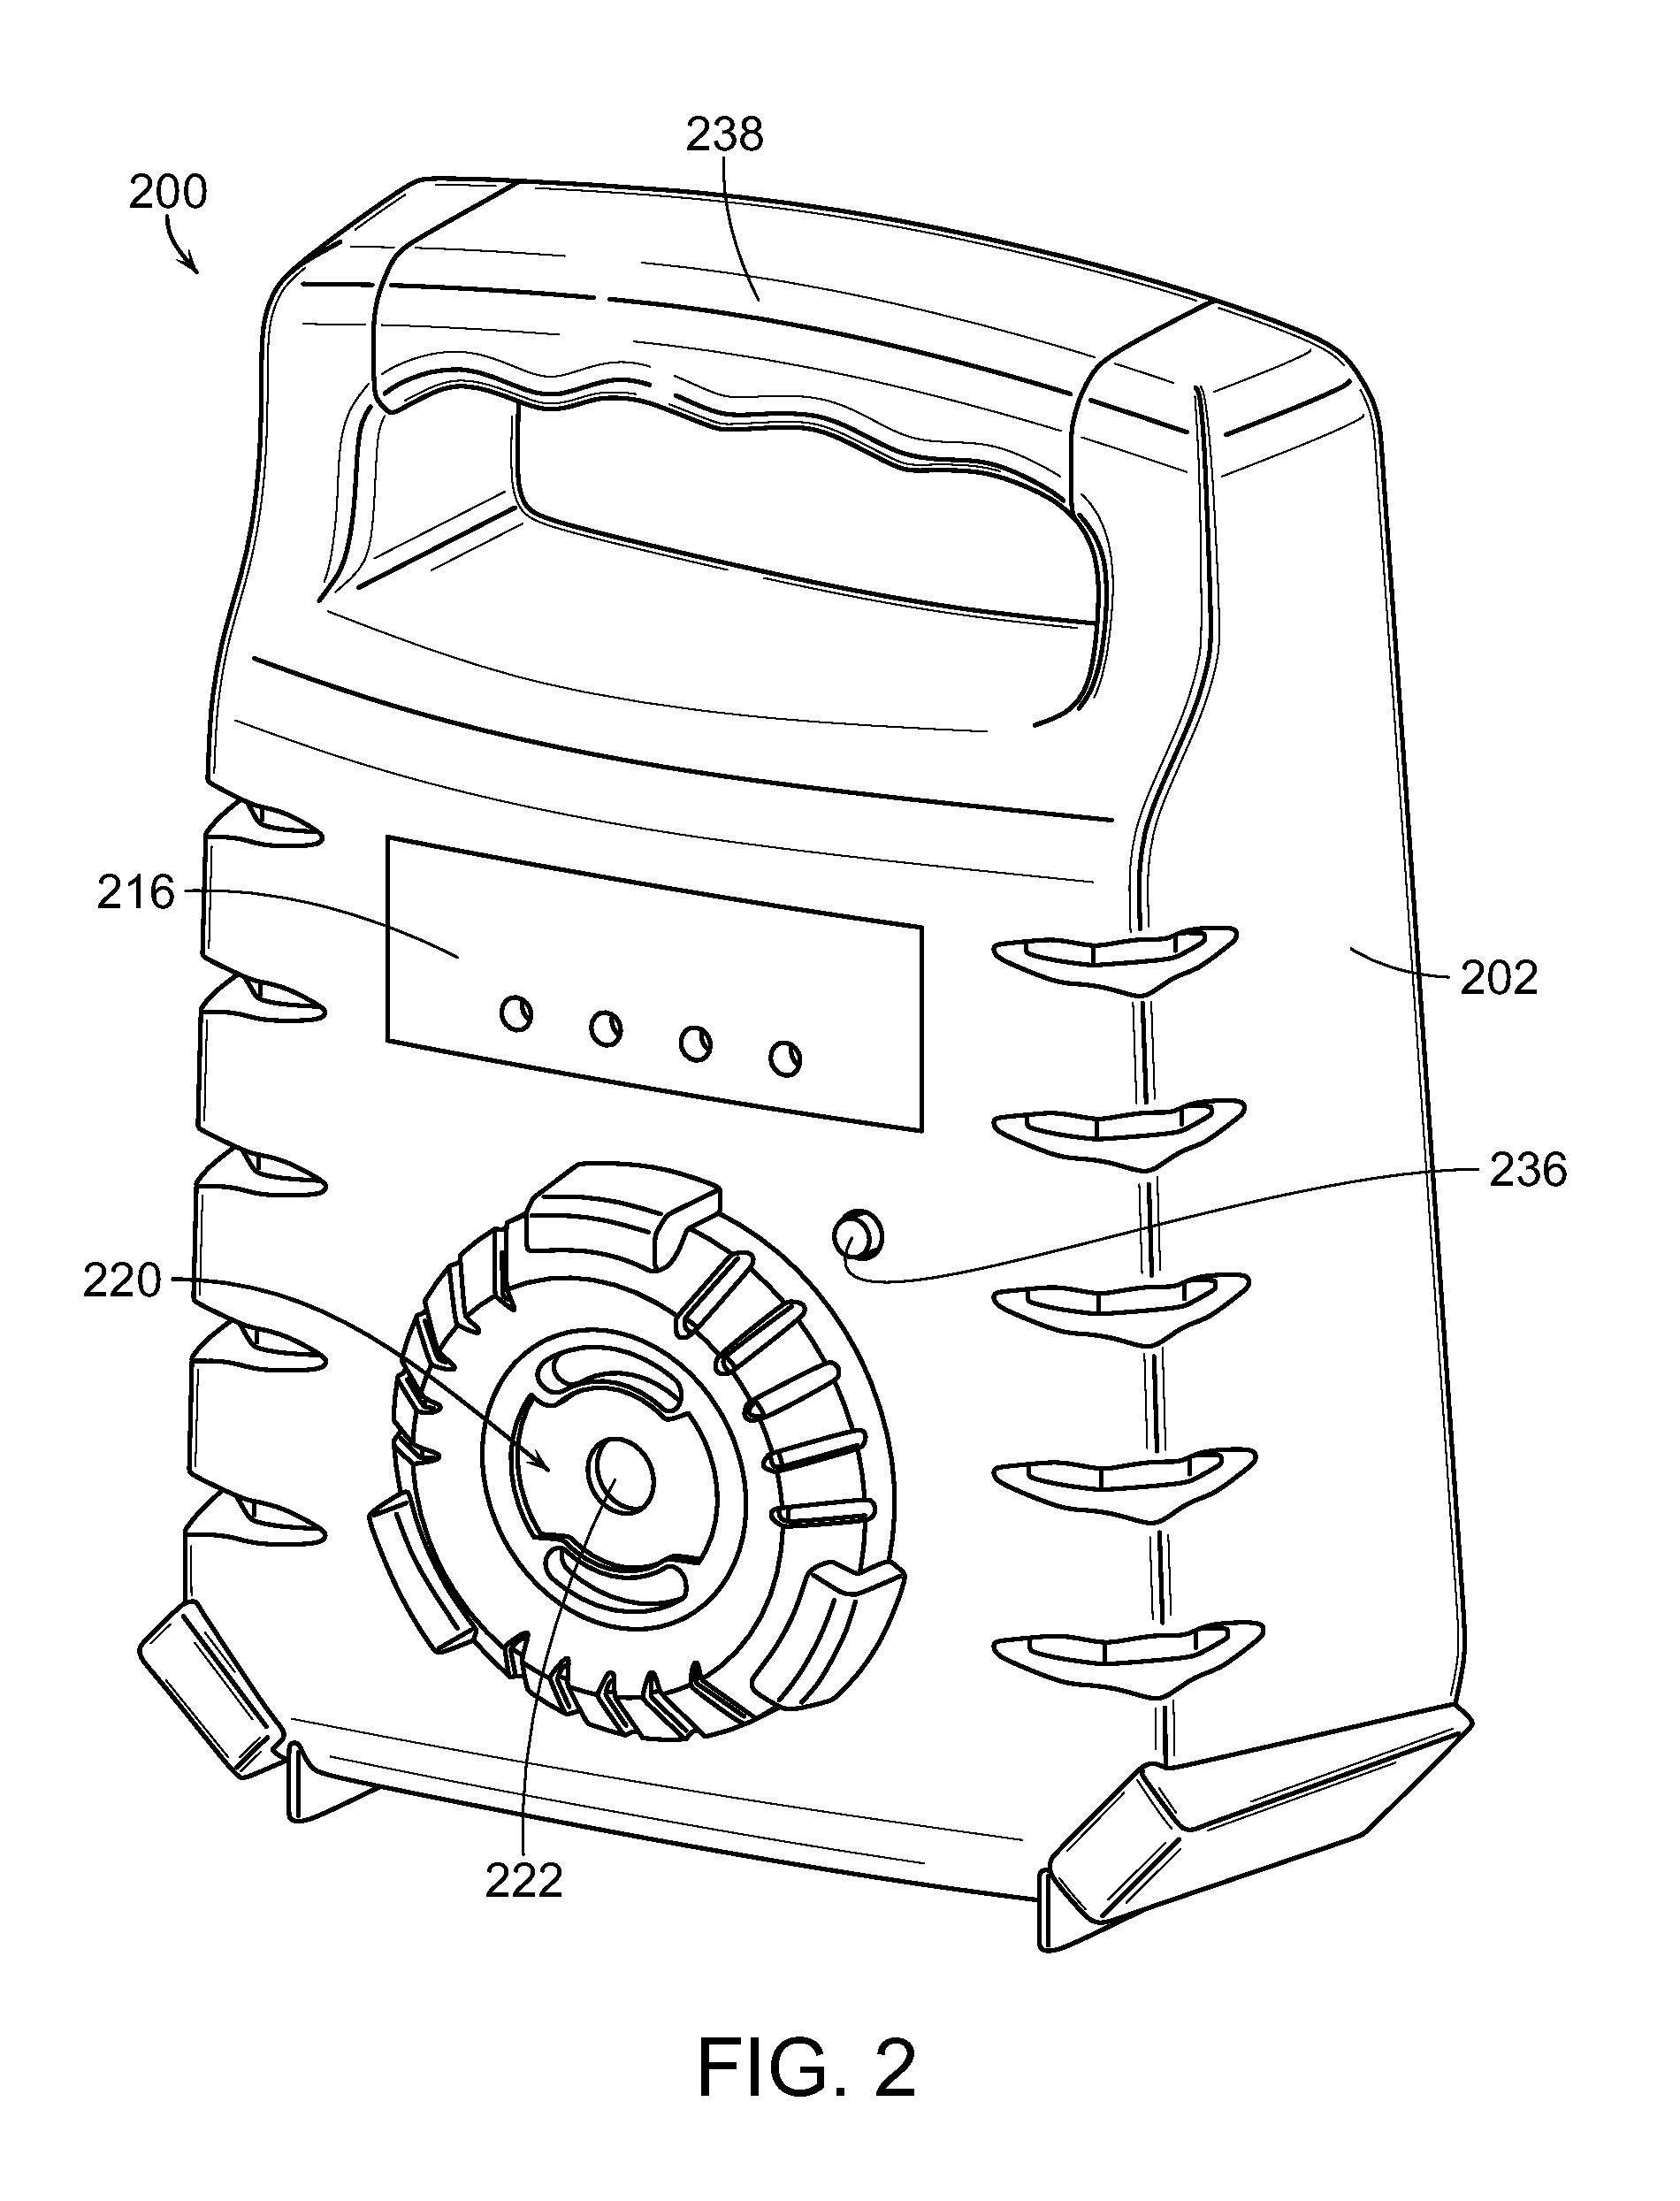 Wireless time attendance system and method